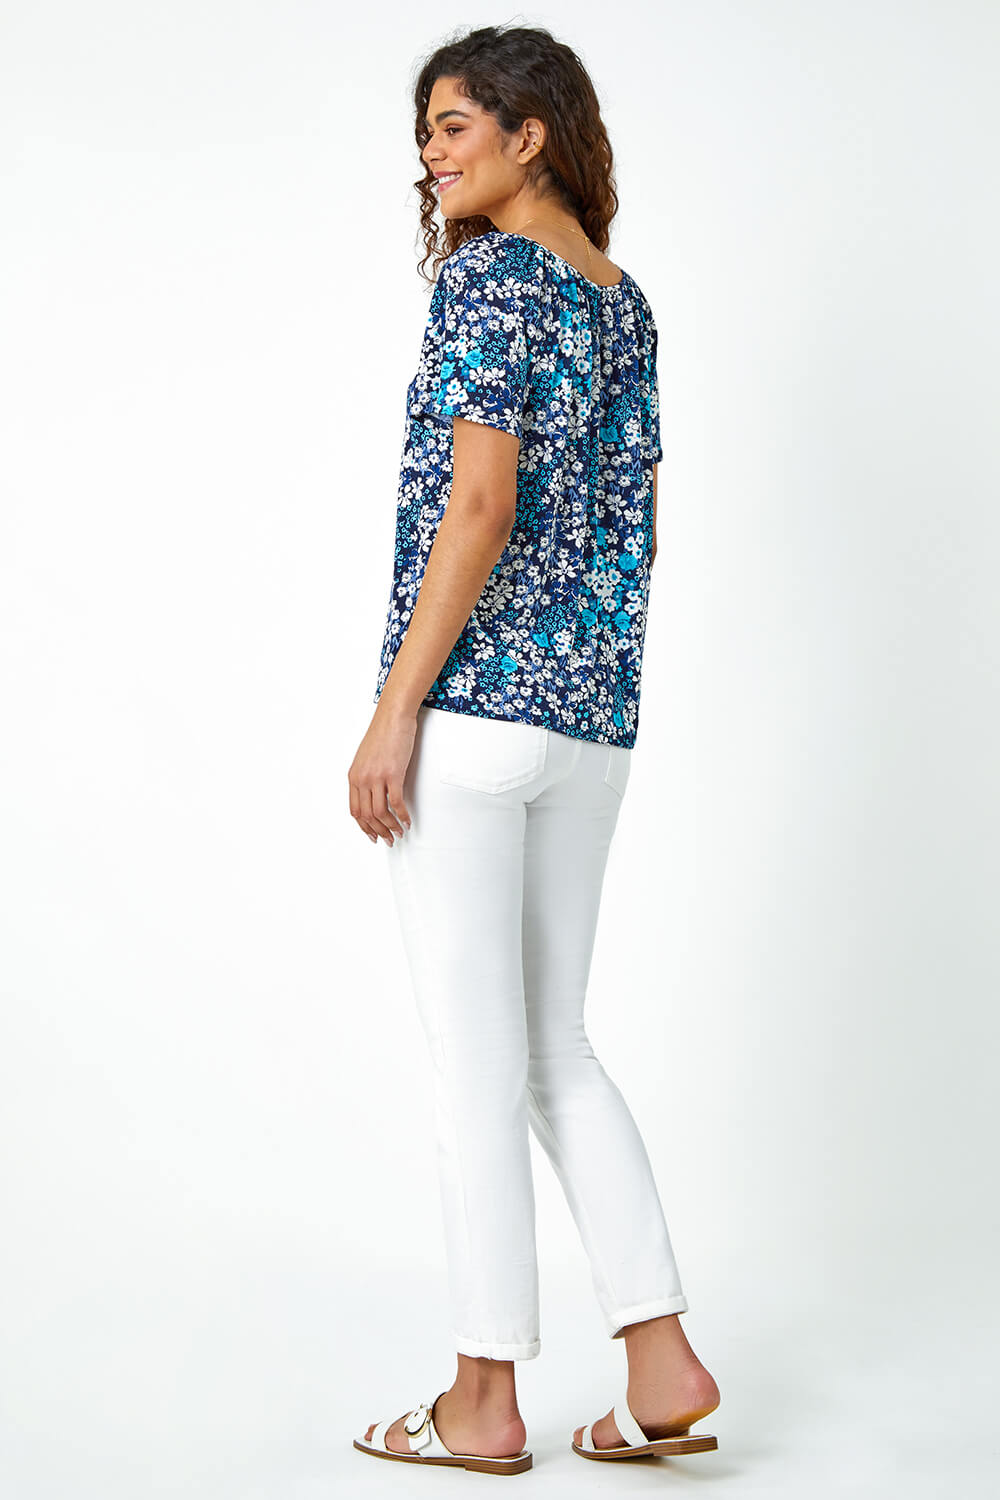 Blue Textured Floral Print Stretch T-Shirt, Image 3 of 5